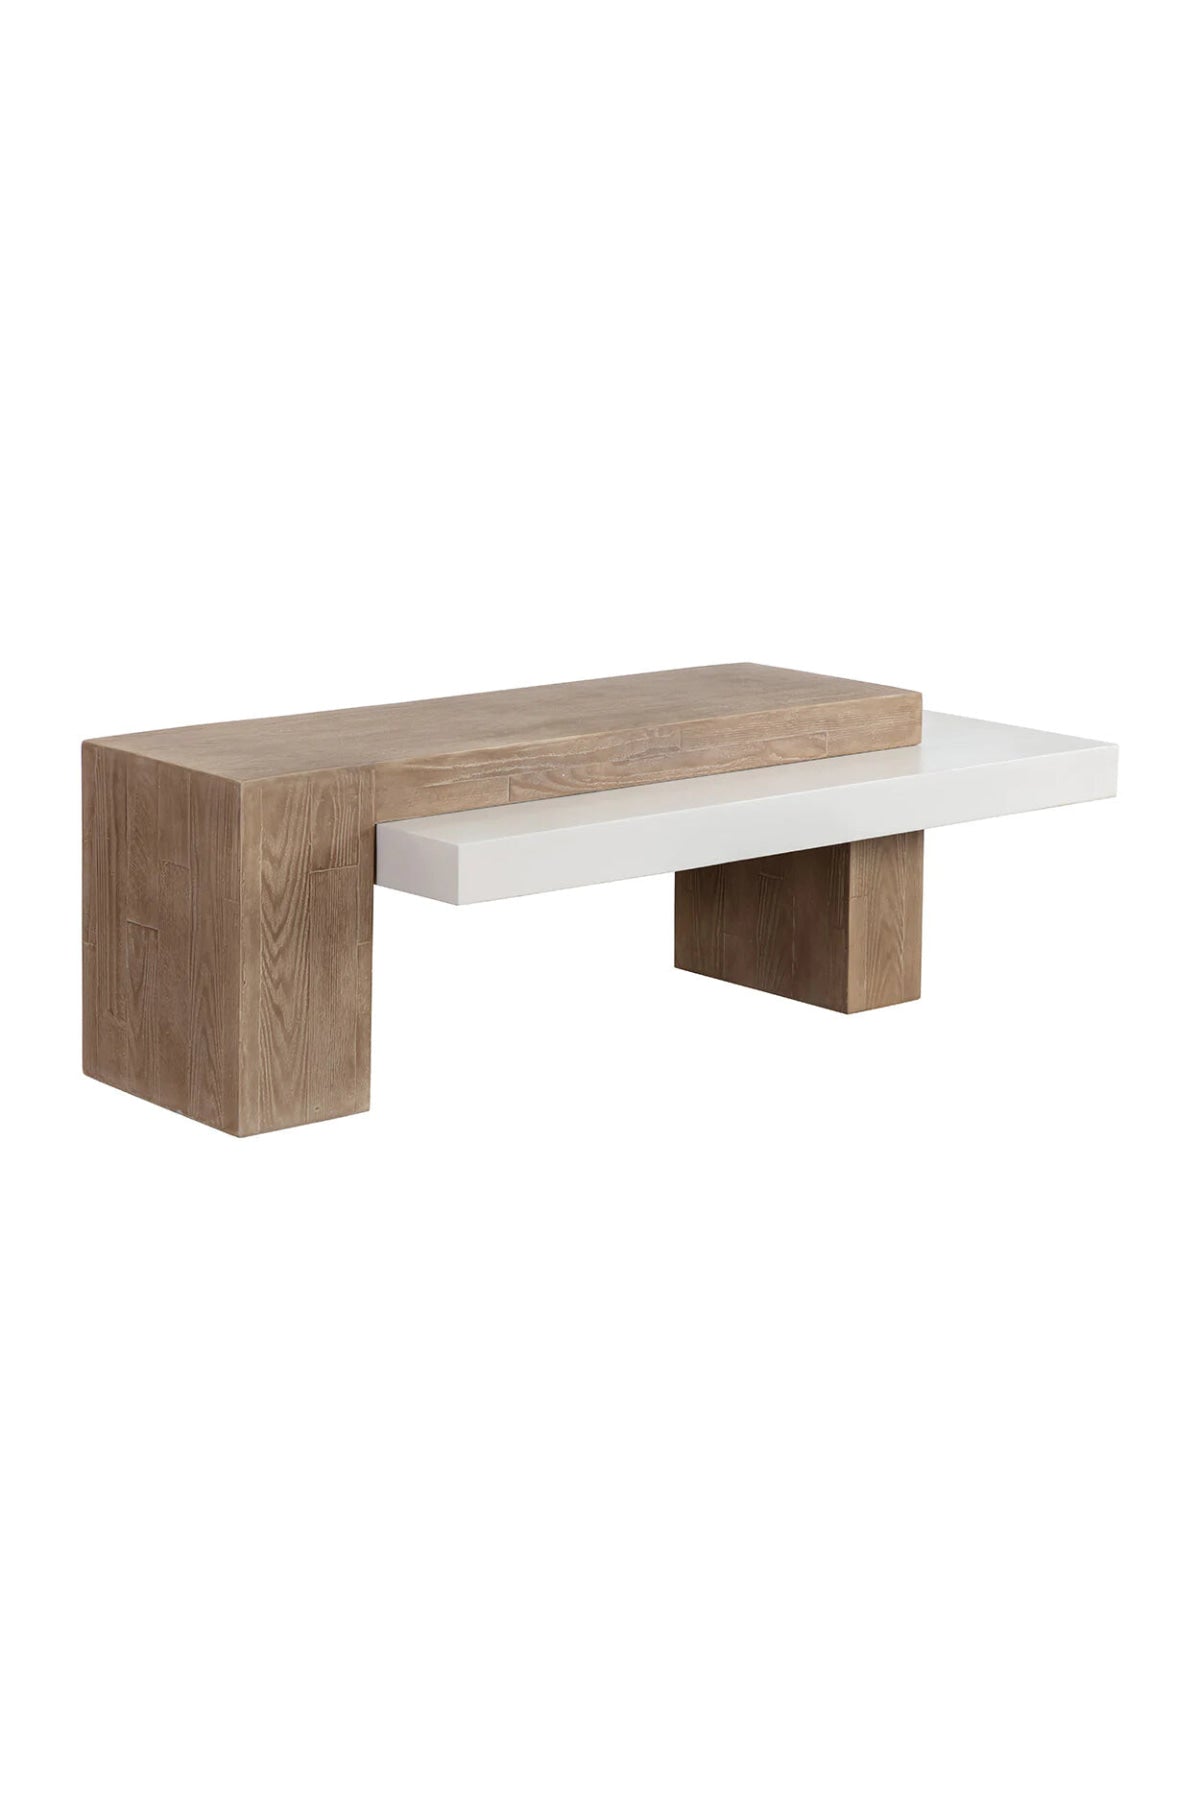 Styles Coffee Table